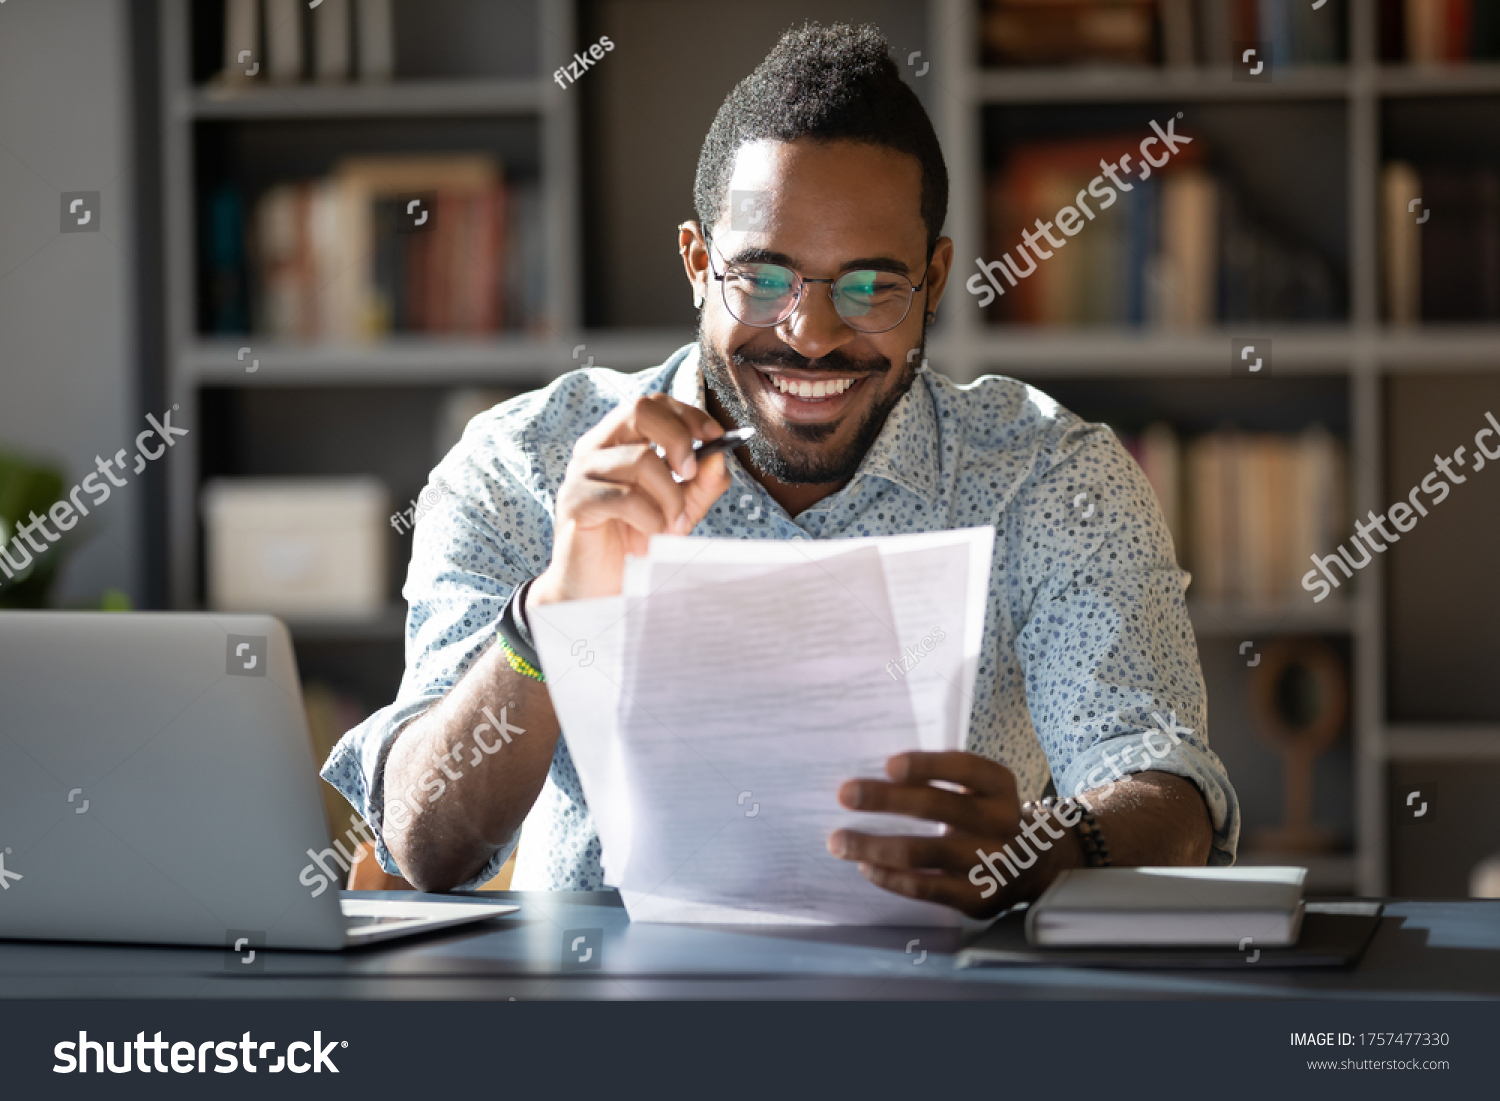 African student guy sitting at desk holding papers printed tasks perform test prepares for entrance exams enjoy process of study. Teacher checking assignment homework, company lawyer paperwork concept #1757477330